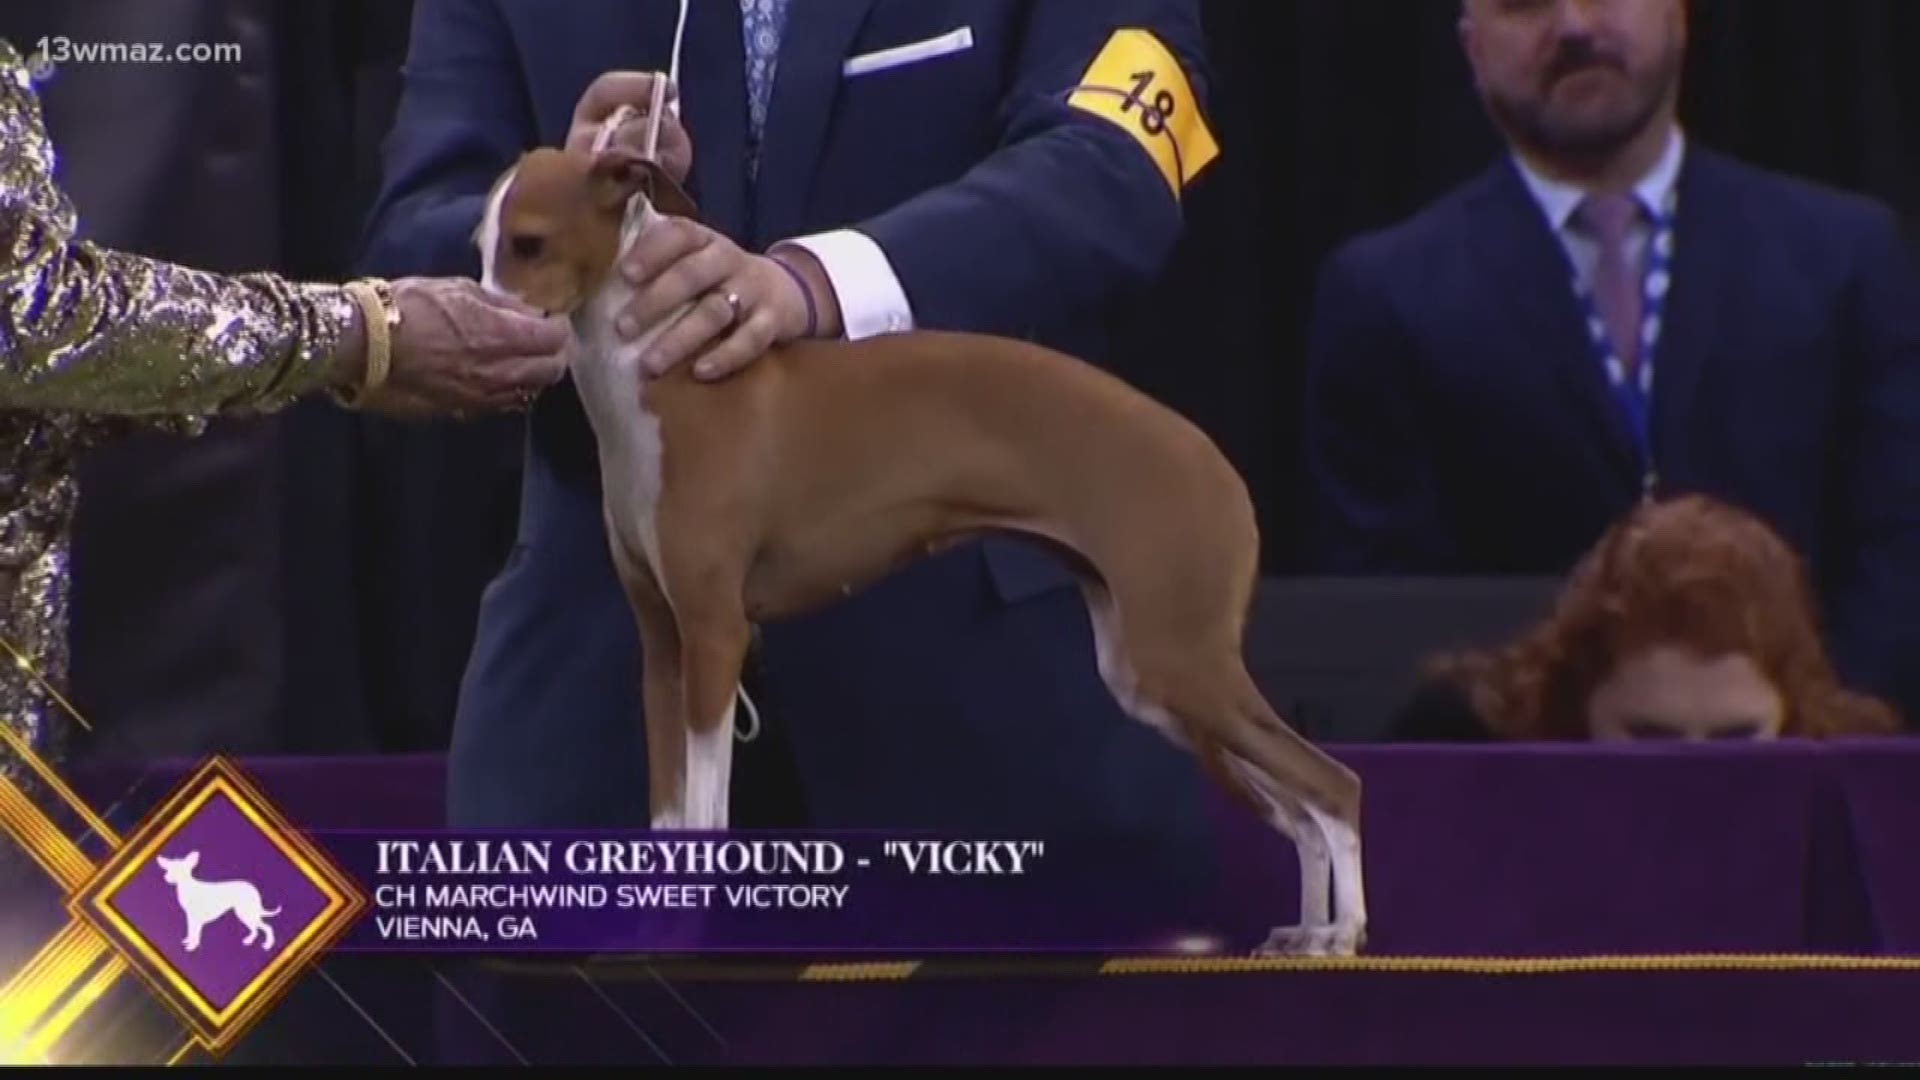 Vienna in Dooly County recently got a shout out on national television at the Westminster Dog Show. That's because the best Italian Greyhound in the country lives there.